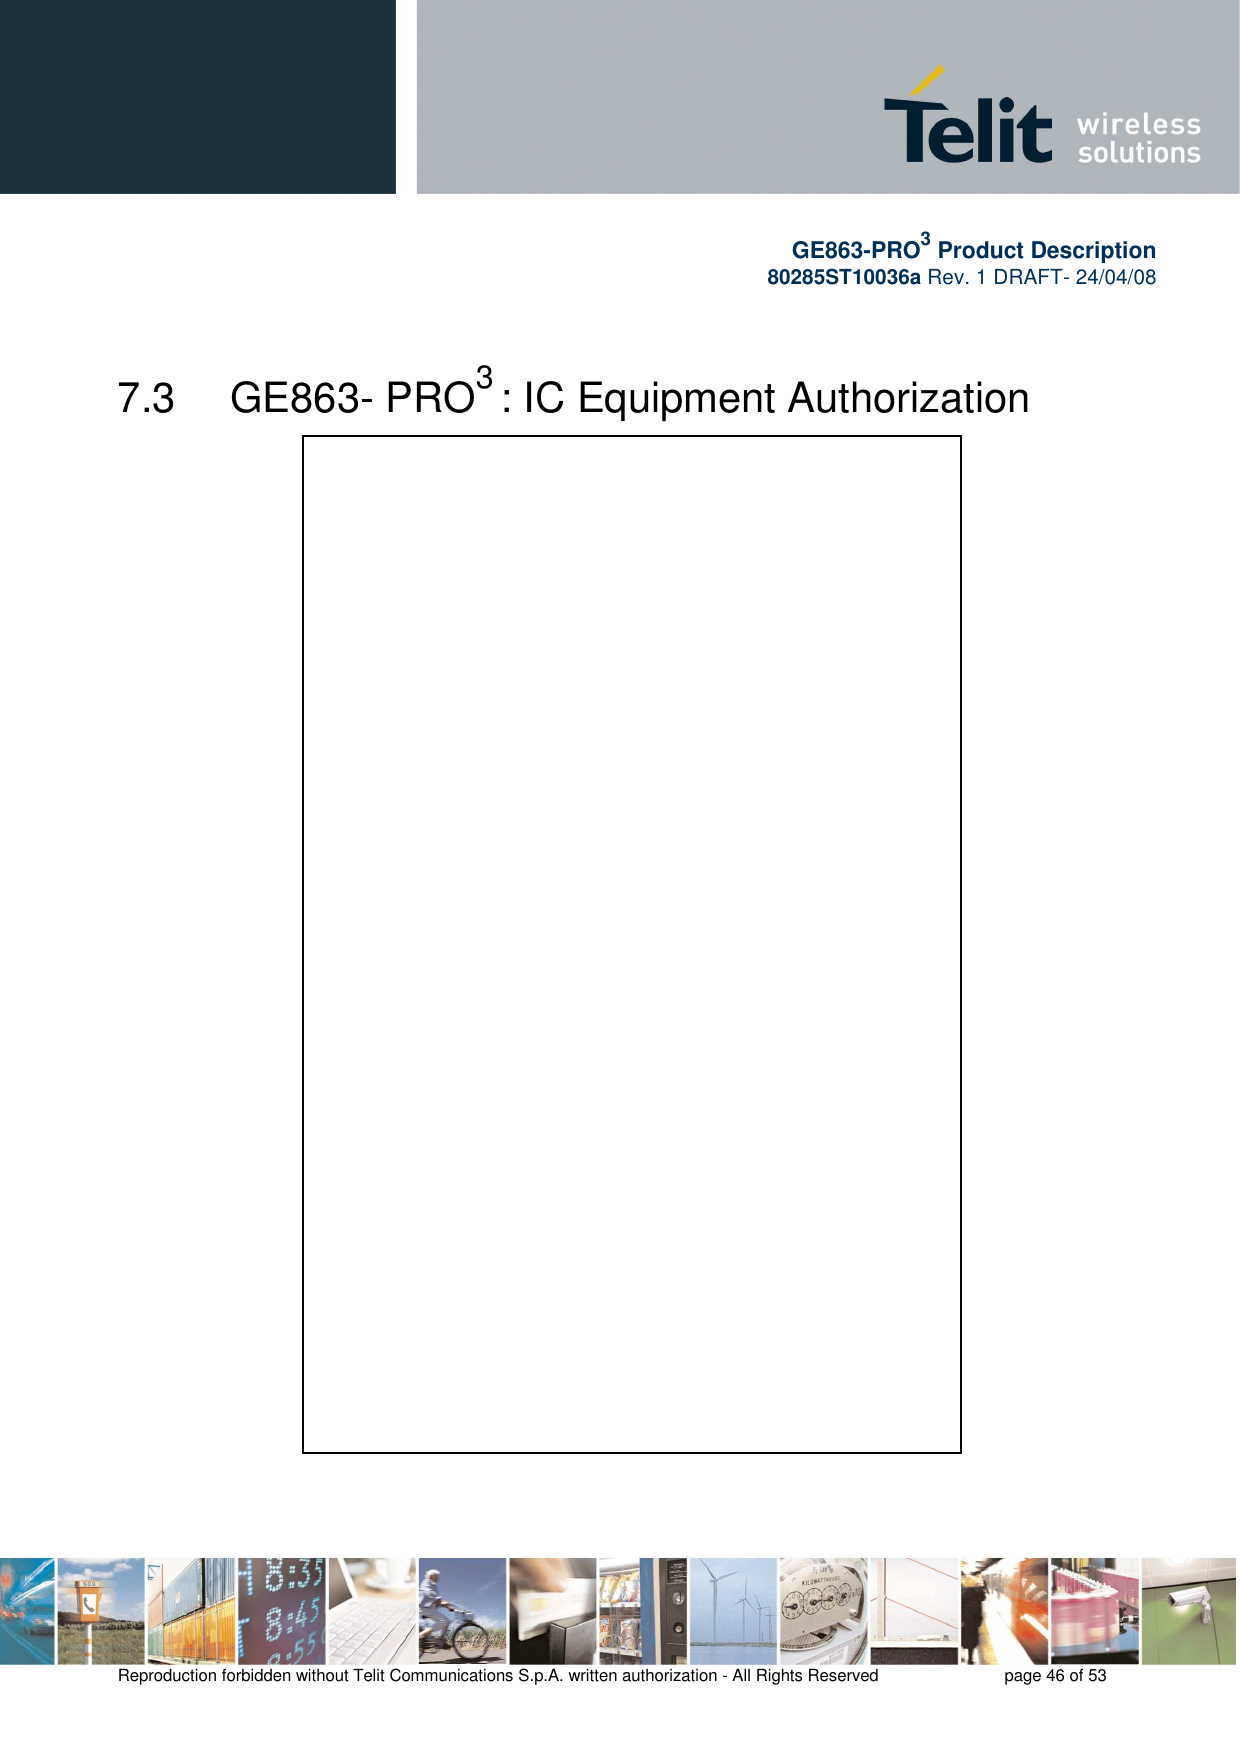       GE863-PRO3 Product Description 80285ST10036a Rev. 1 DRAFT- 24/04/08    Reproduction forbidden without Telit Communications S.p.A. written authorization - All Rights Reserved    page 46 of 53   7.3   GE863- PRO3 : IC Equipment Authorization 